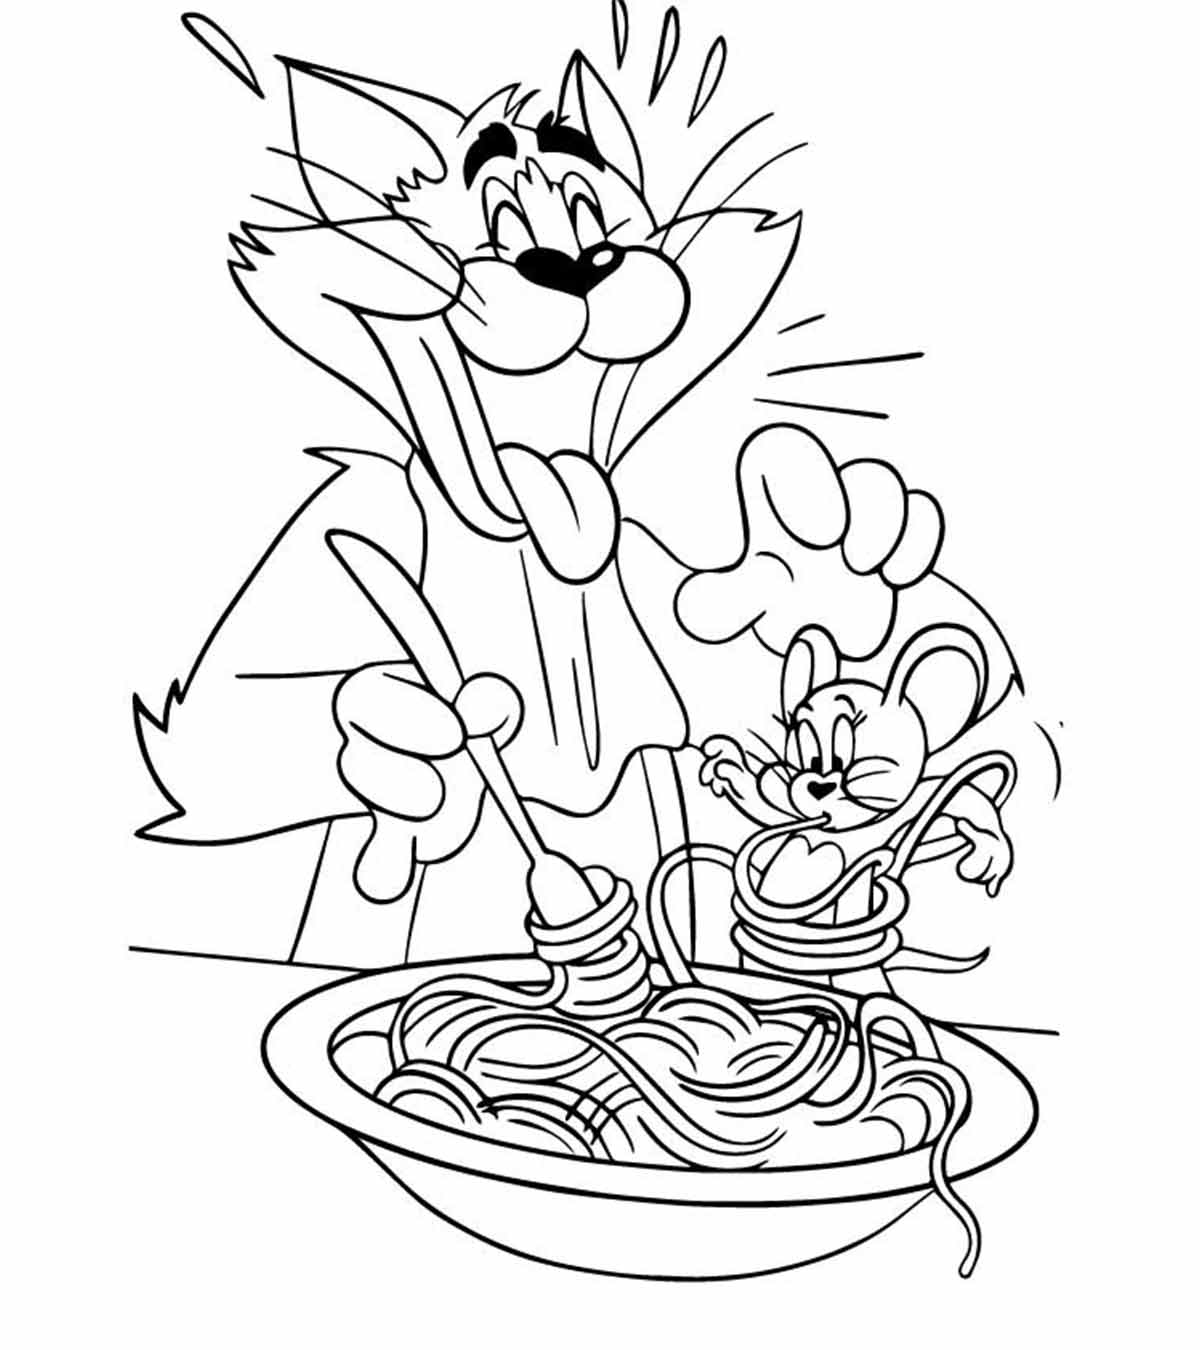 10 Cute Tom And Jerry Coloring Pages Your Toddler Will Love To Color